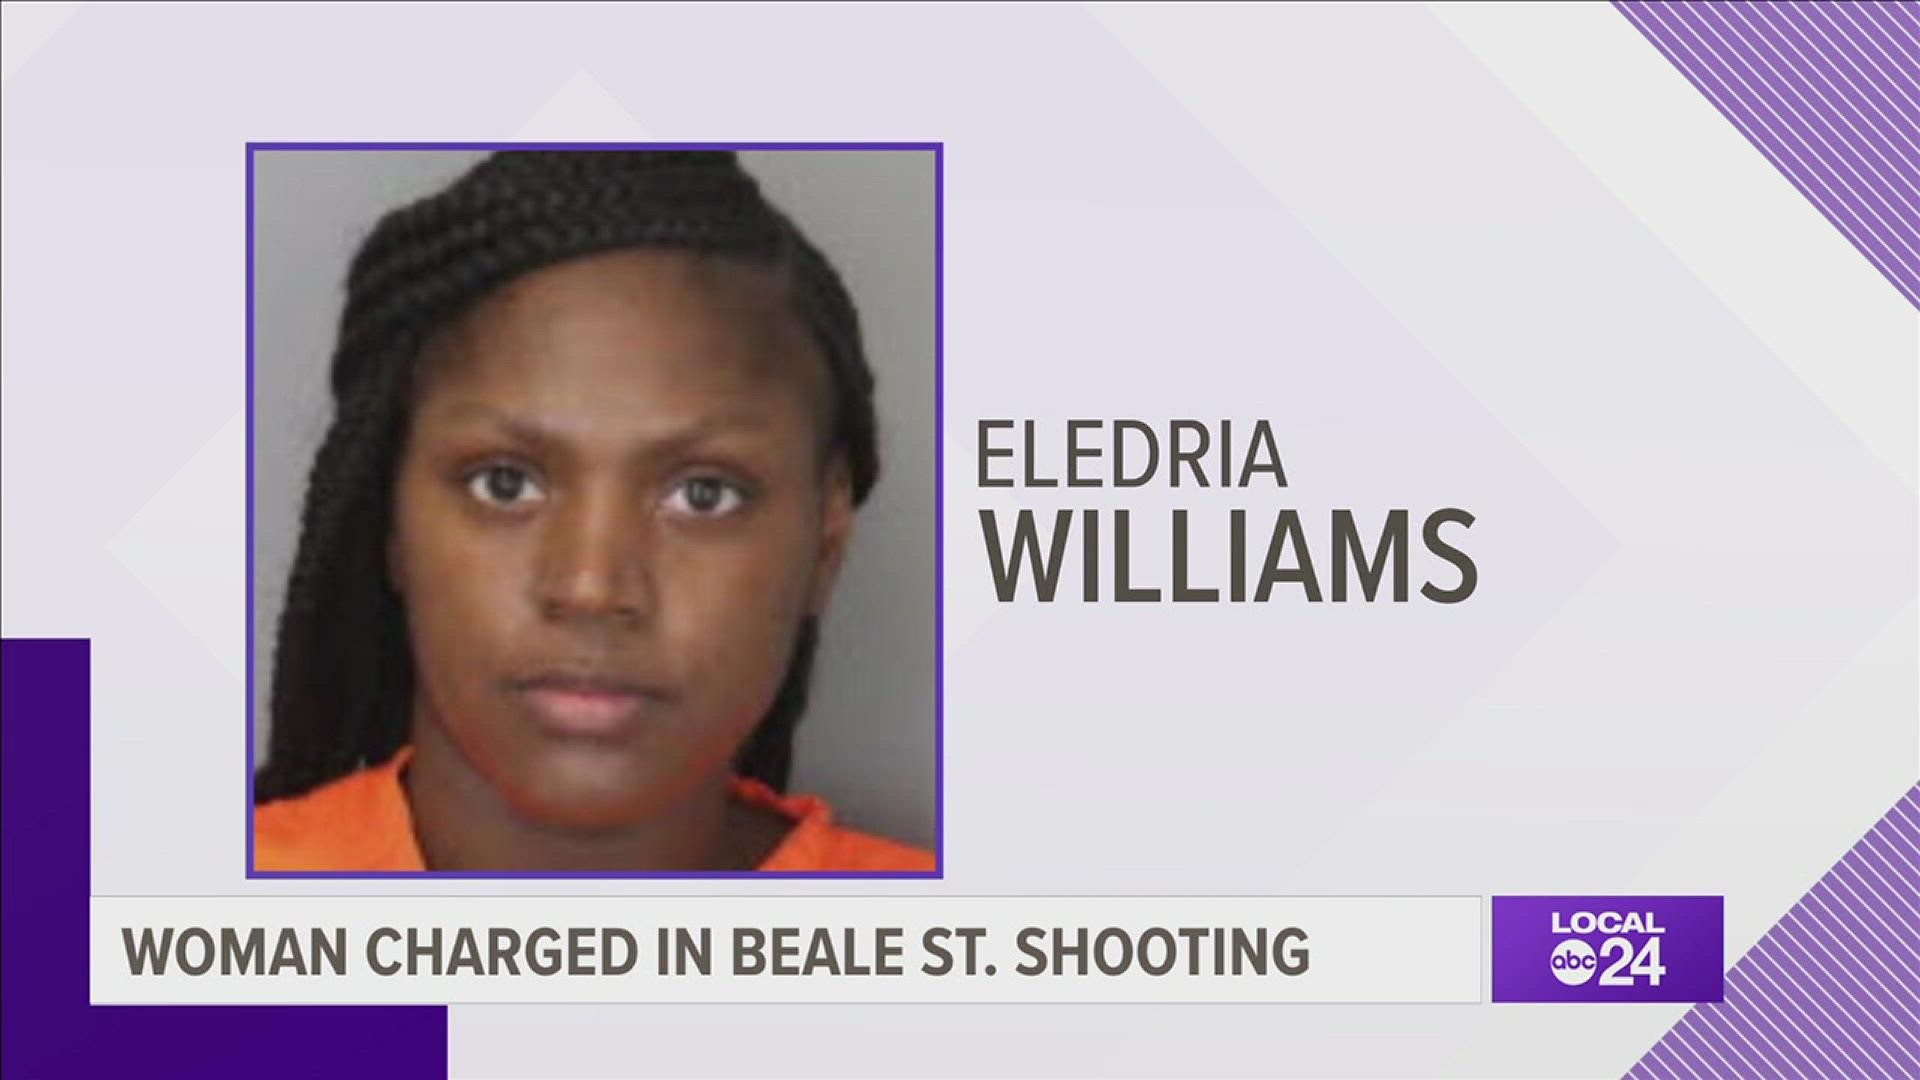 Eledria Williams is charged with attempted murder.